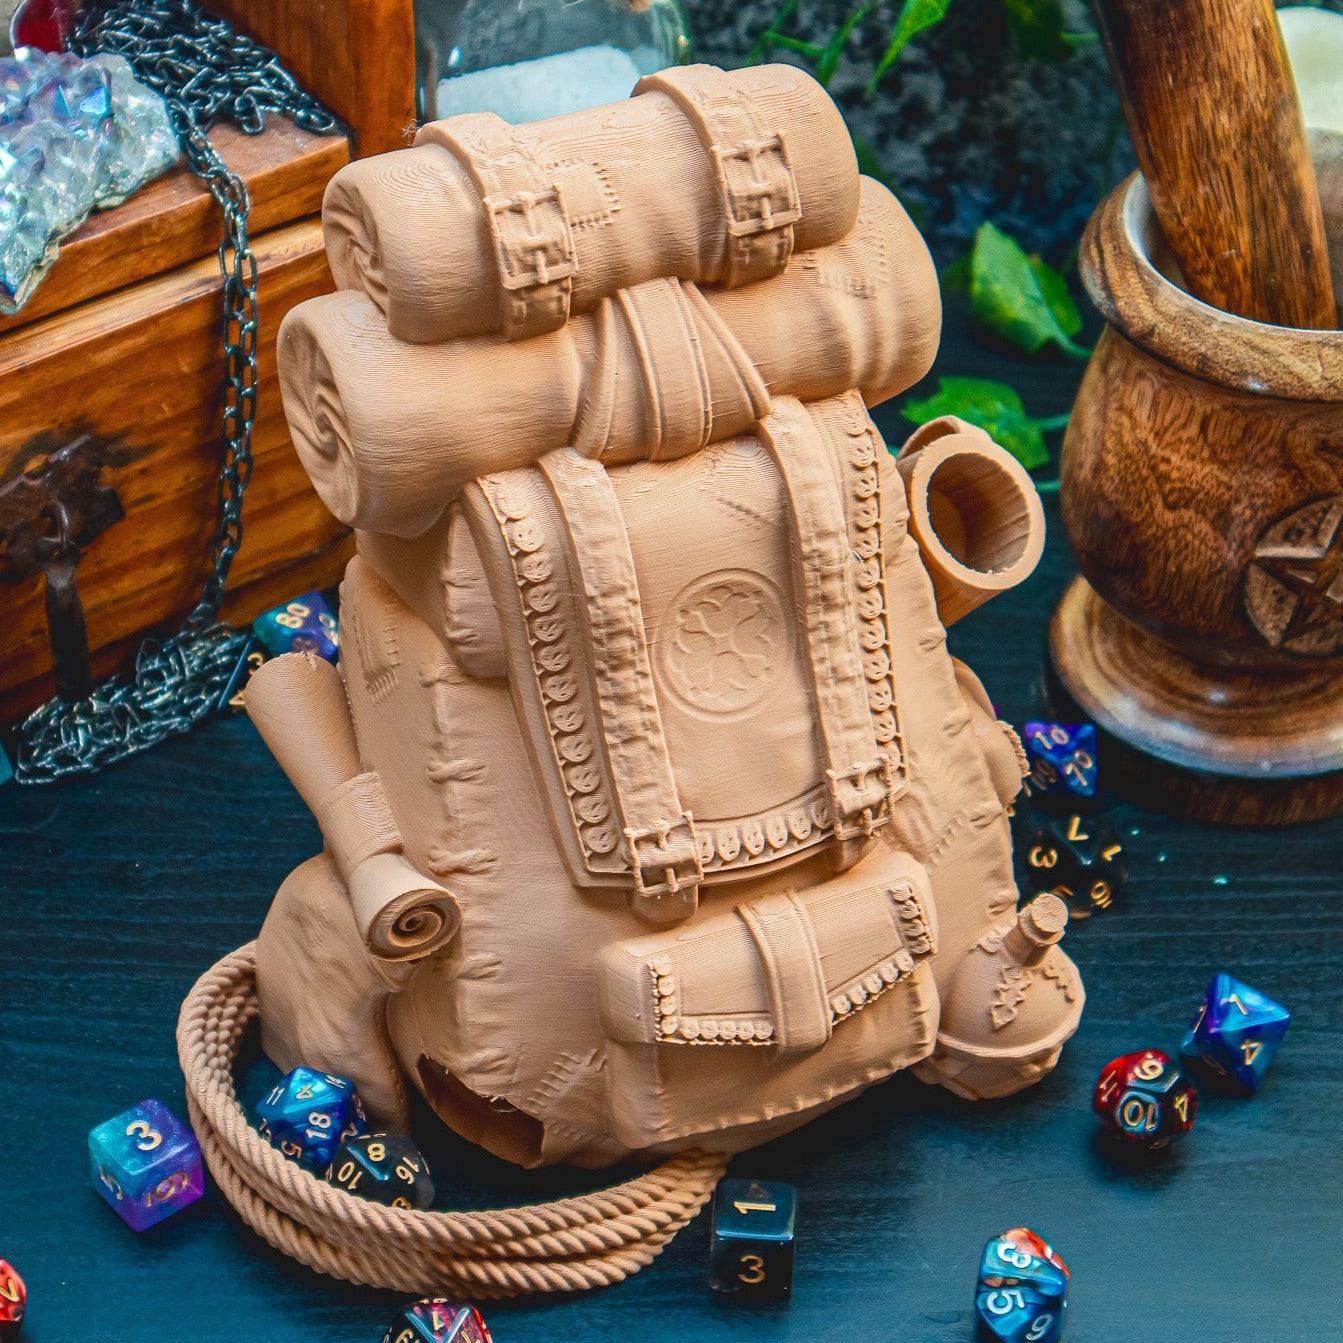 Adventurer's Backpack Dice Tower - The Flaming Feather & Flaming Filament